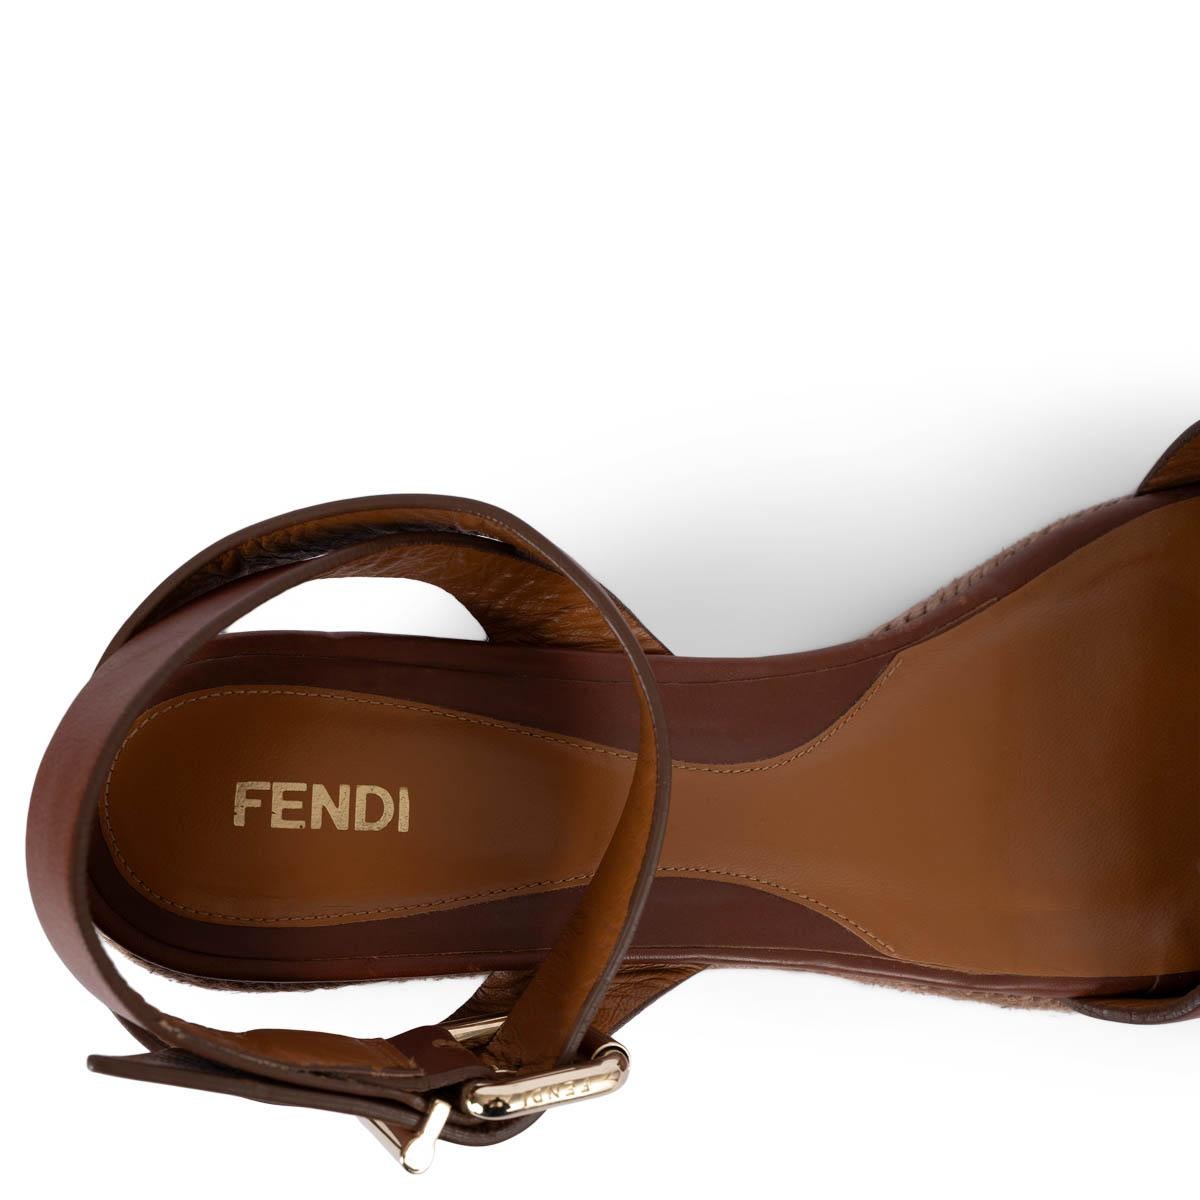 FENDI brown leather ESPADRILLE ANKLE STRAP WEDGE Sandals Shoes 41 For Sale 2